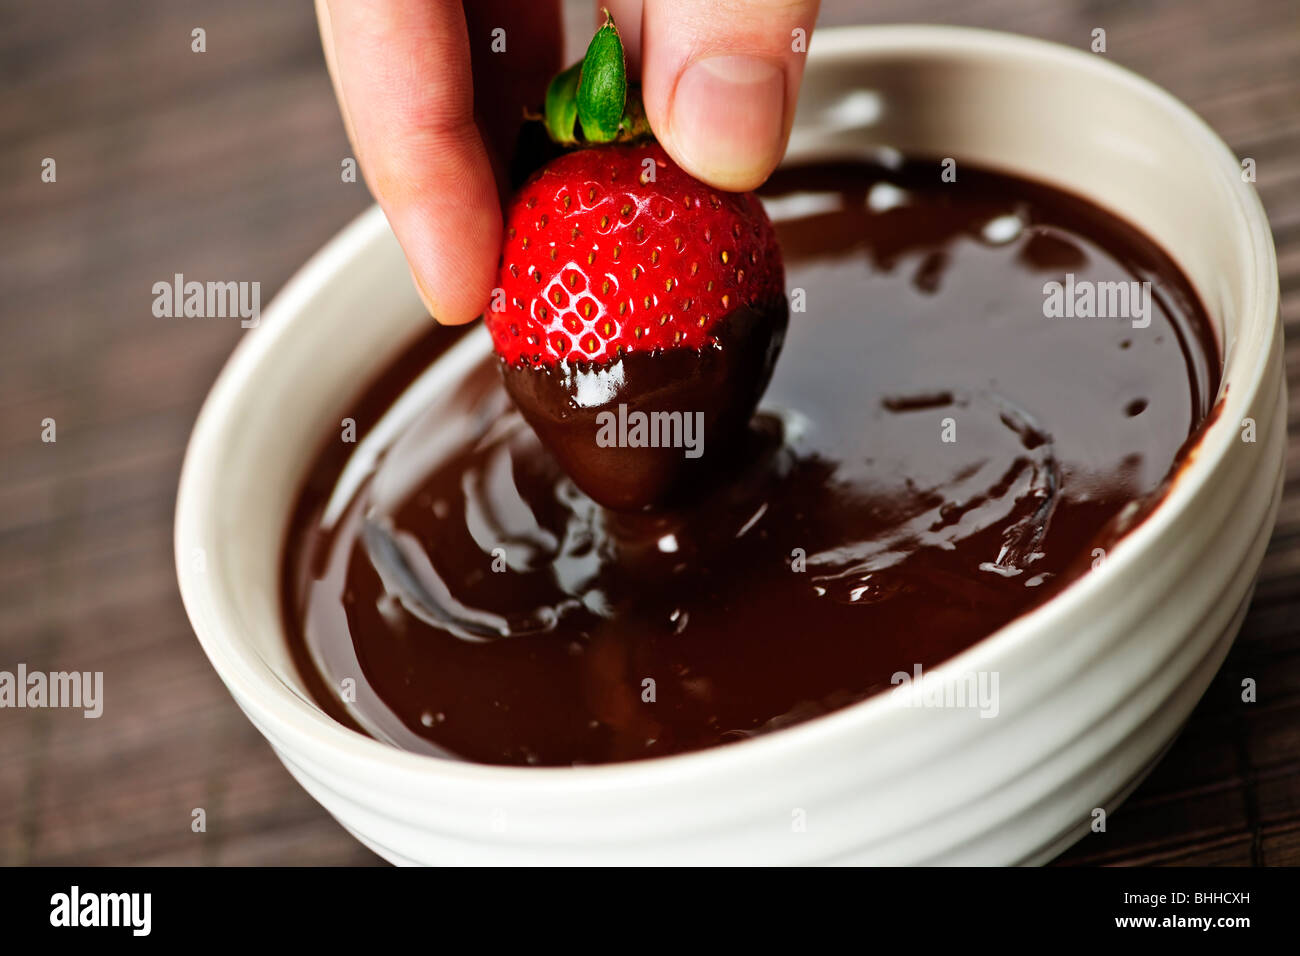 Hand dipping fresh strawberry in melted chocolate Stock Photo